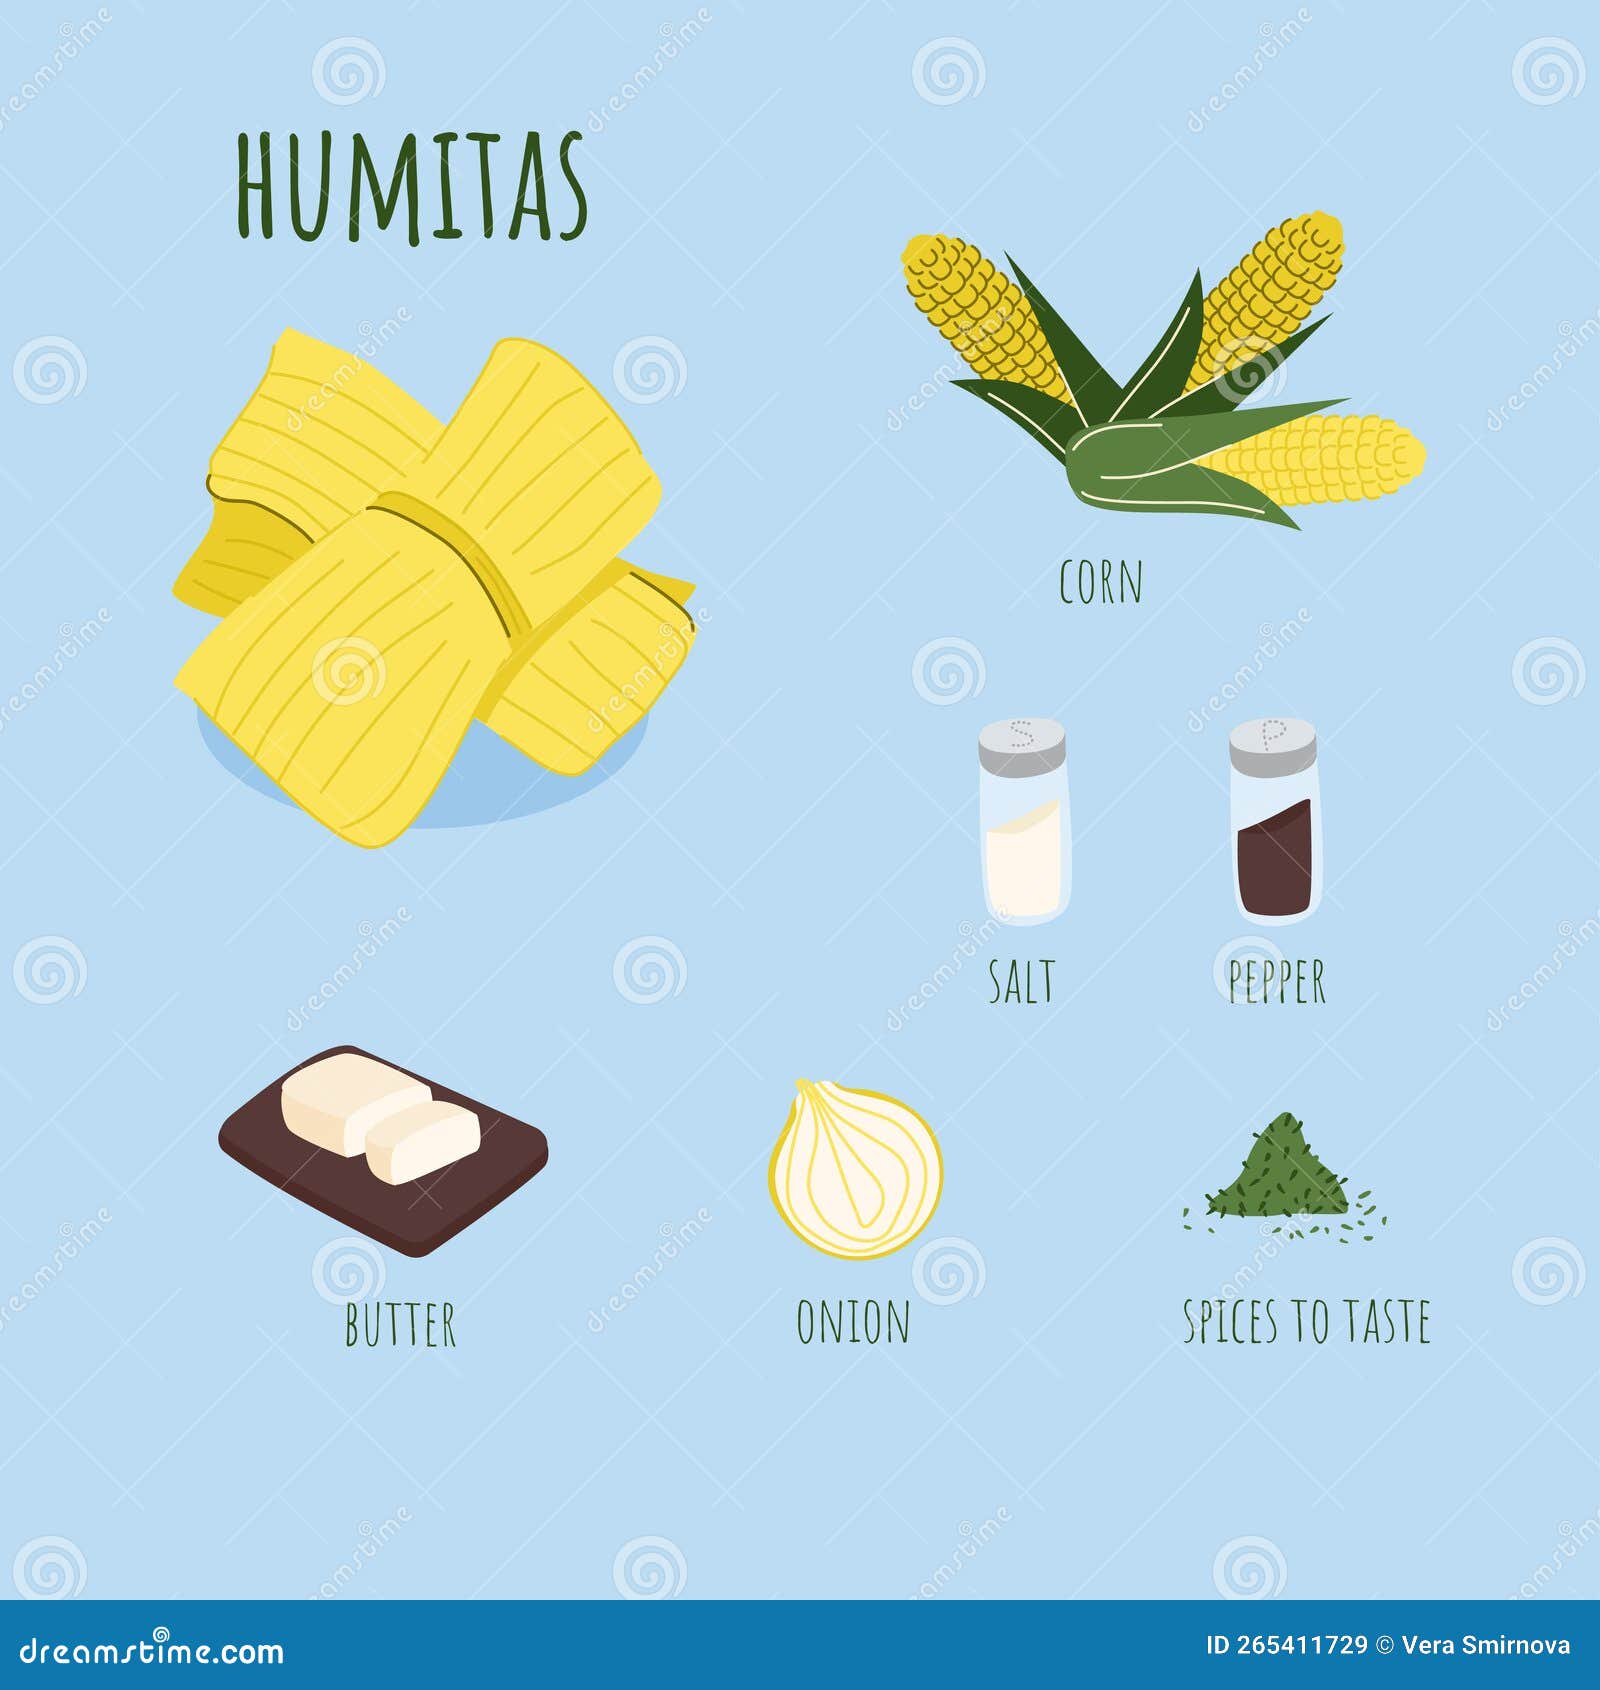 chilean humita corn wrap ingredients. latin american traditional food. fresh corn paste with onion and sipces wrapped in fresh